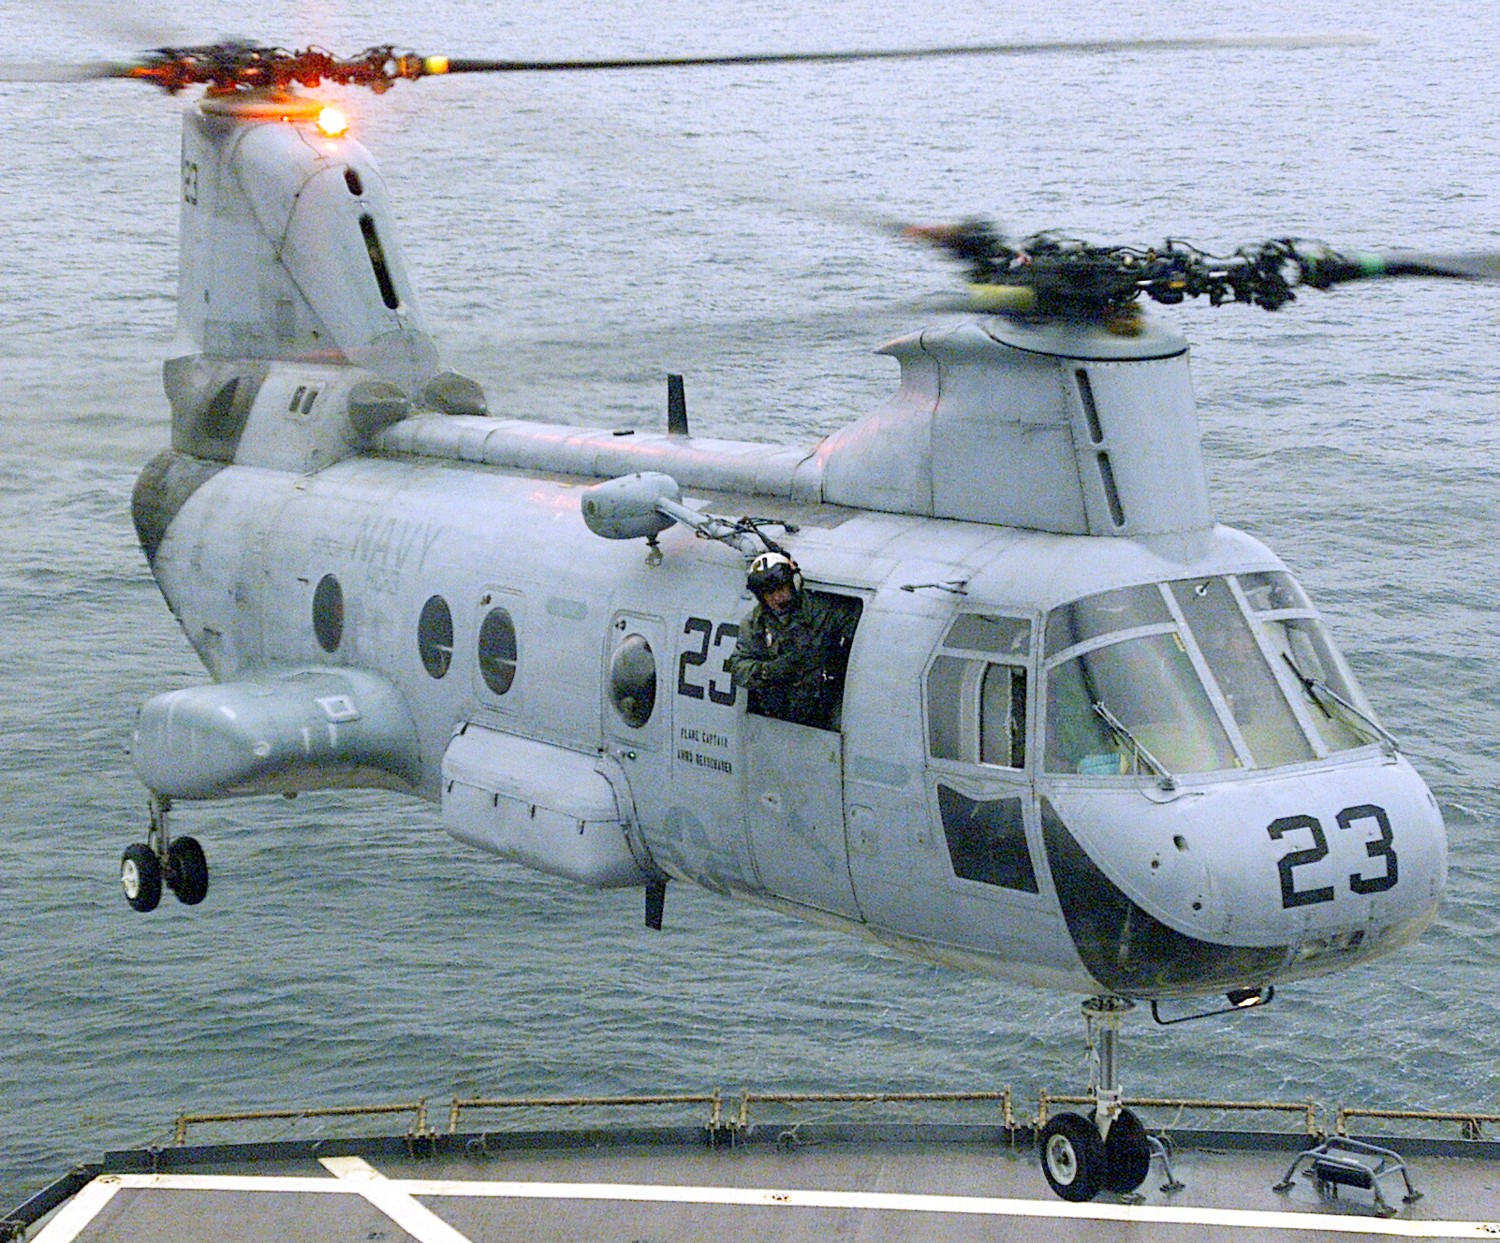 hc-3 pack rats helicopter combat support squadron navy ch-46 sea knight 04